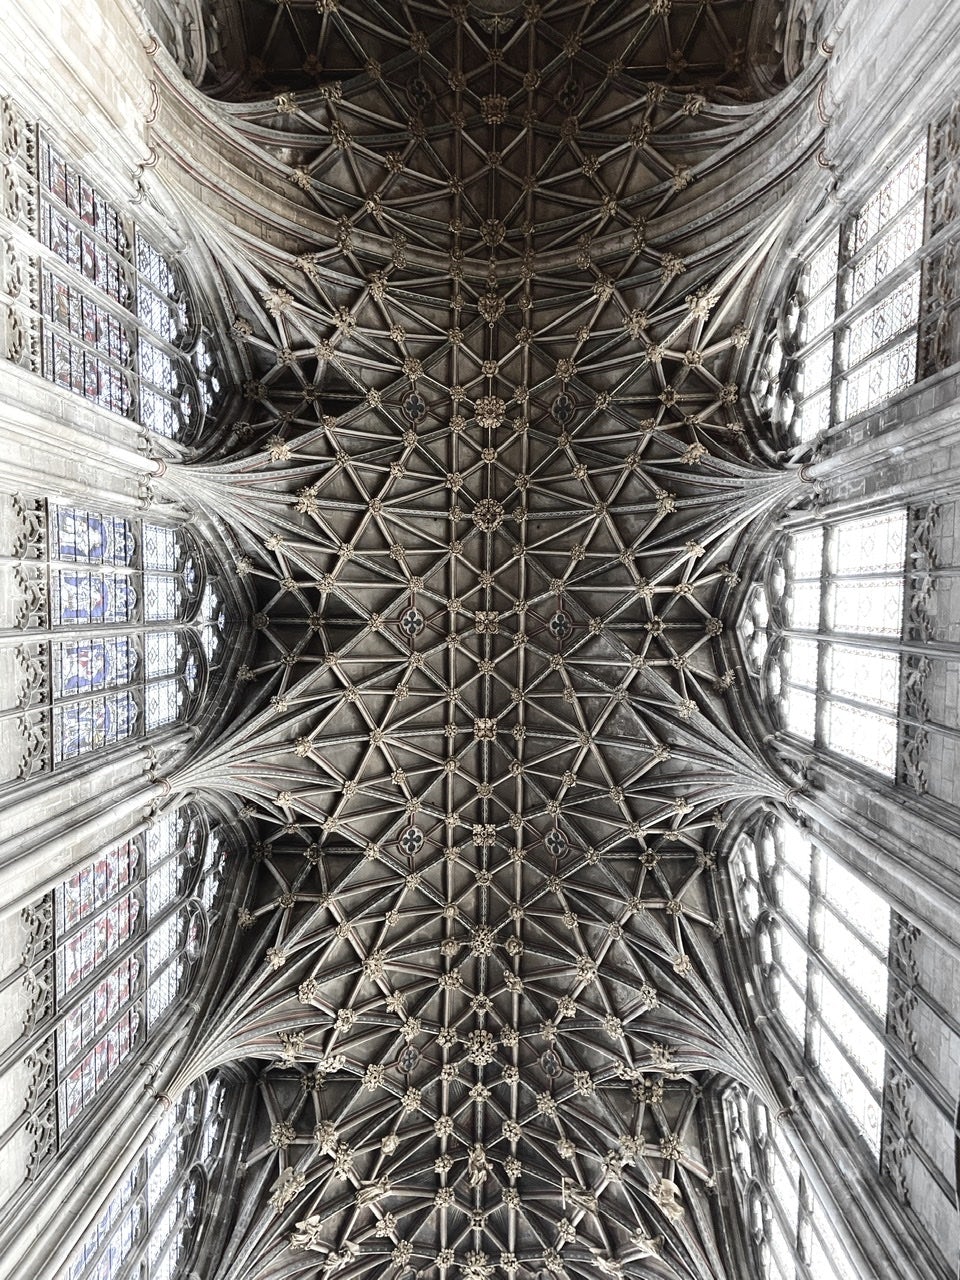 the ceiling of the cathedral which looks like a web